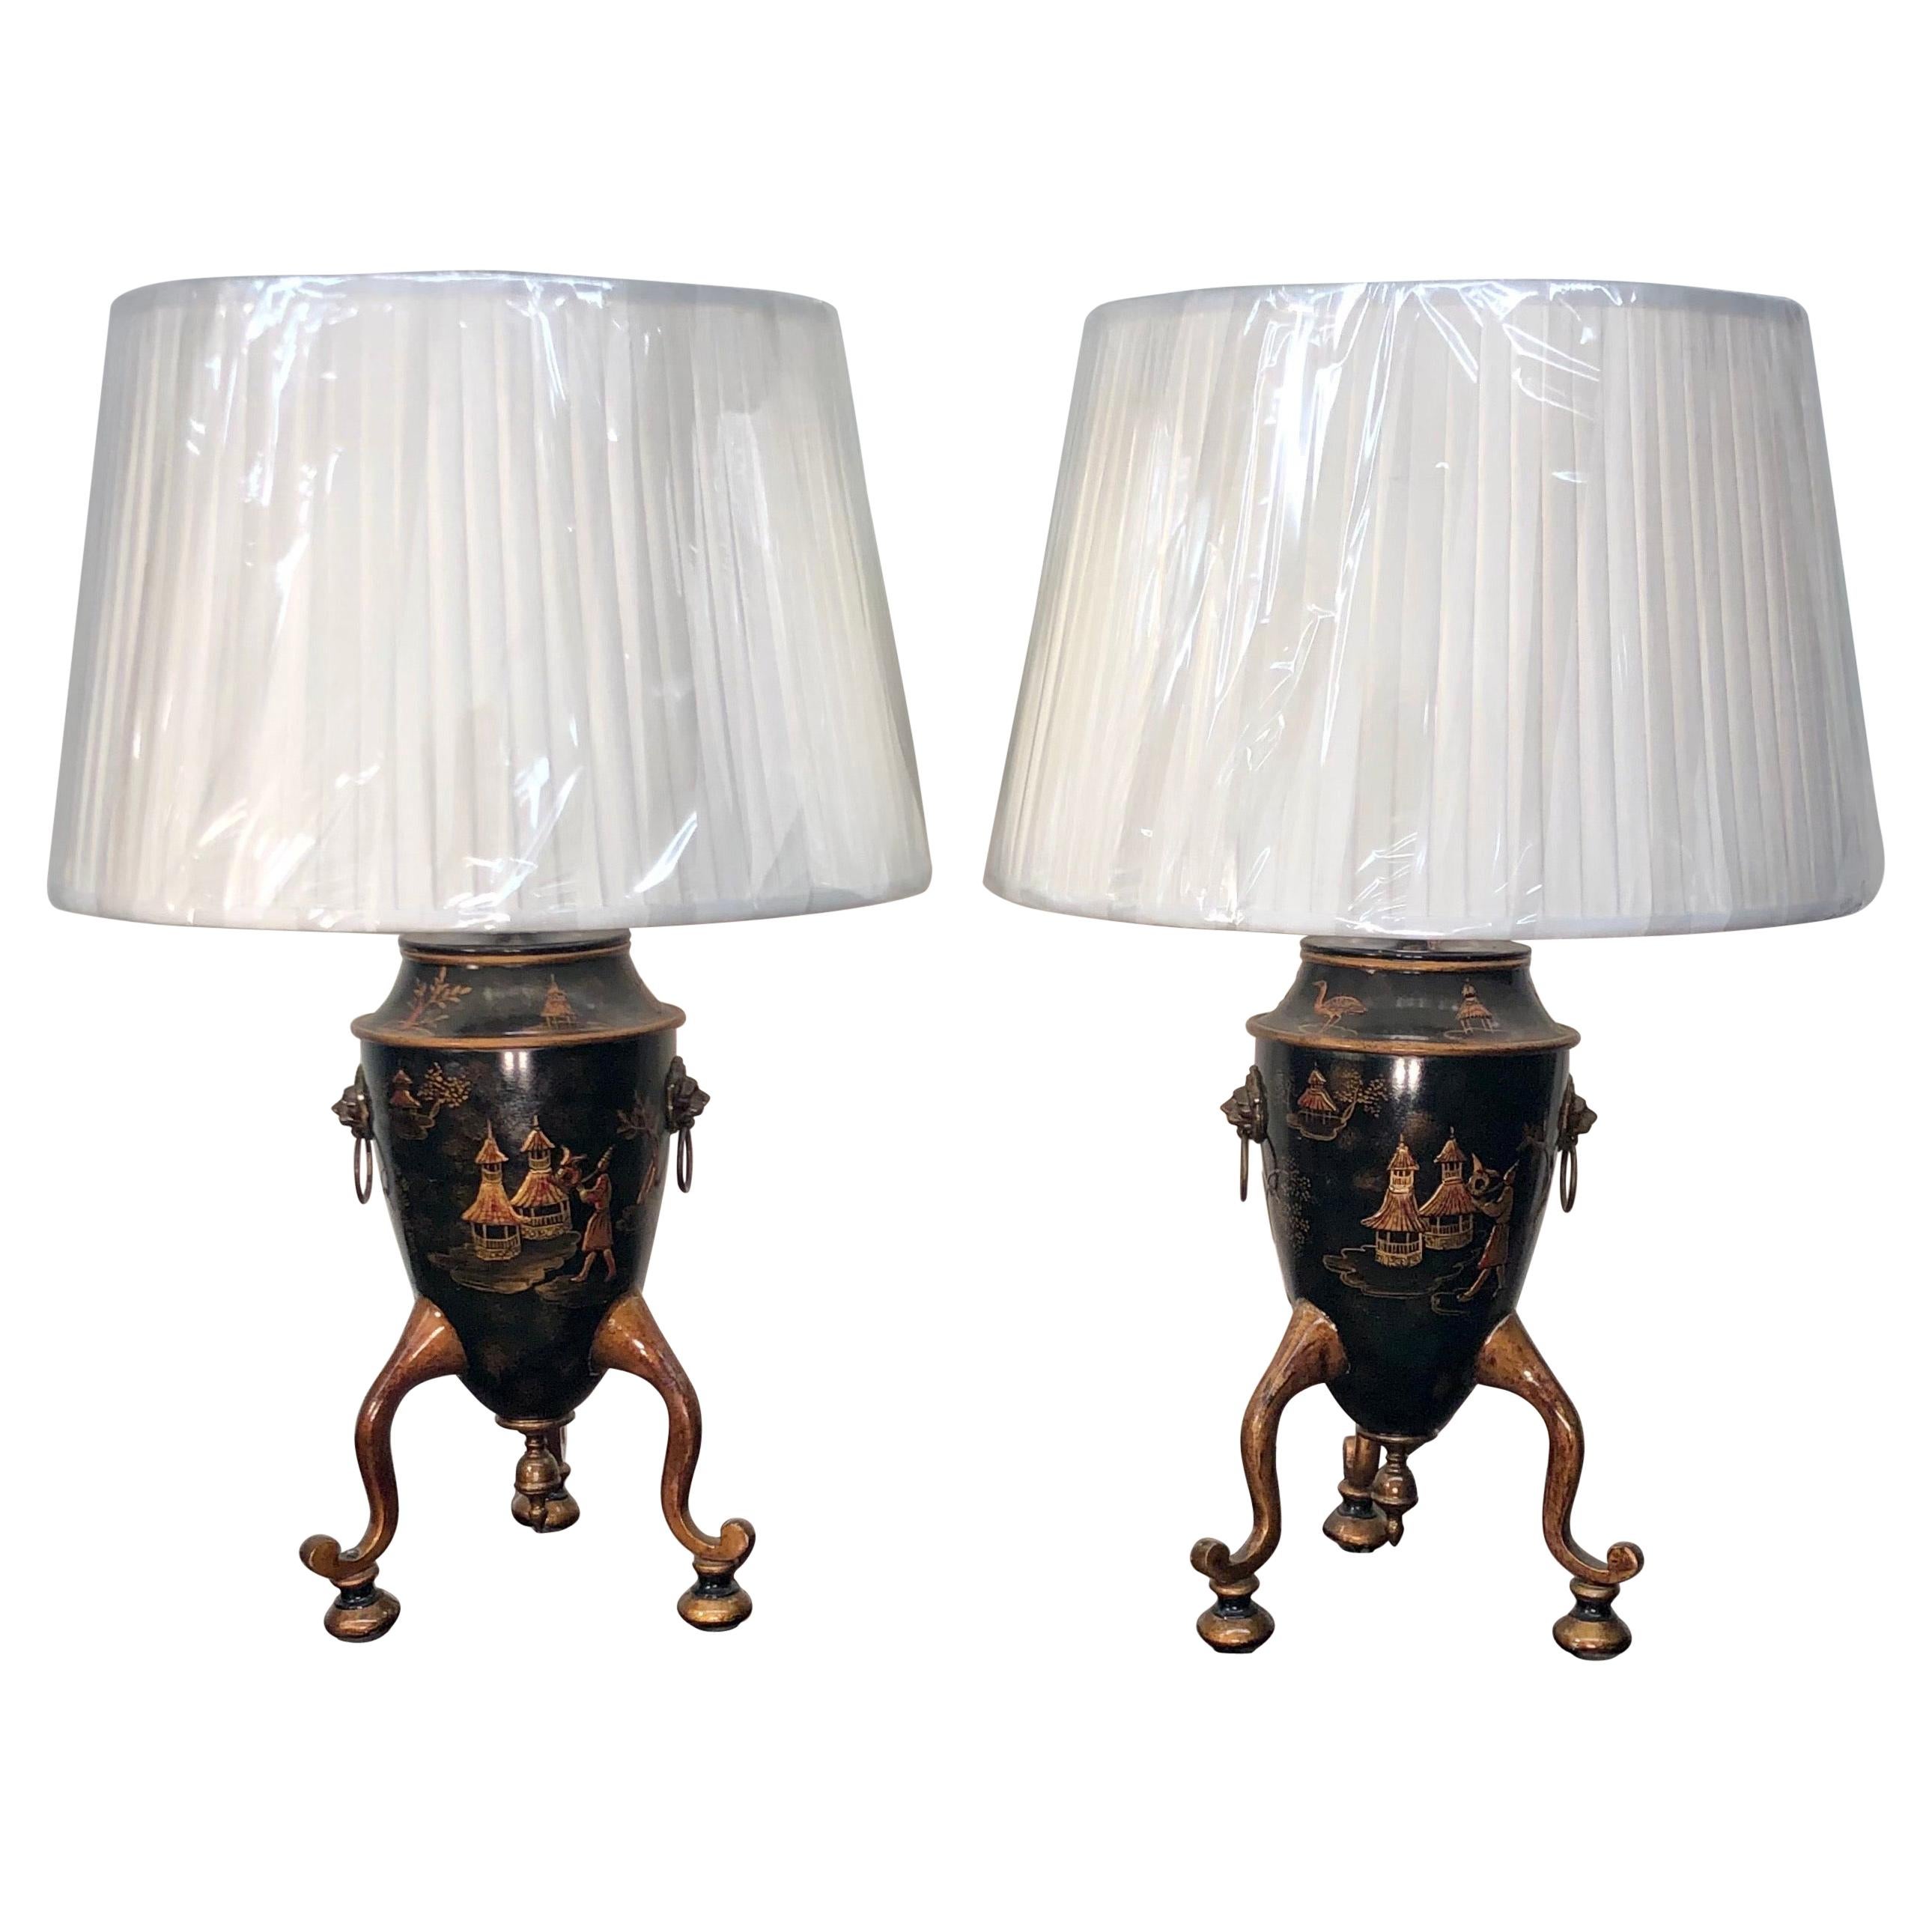 English Pair of Georgian Style Chinoiserie Tole Urns, Made into Lamps